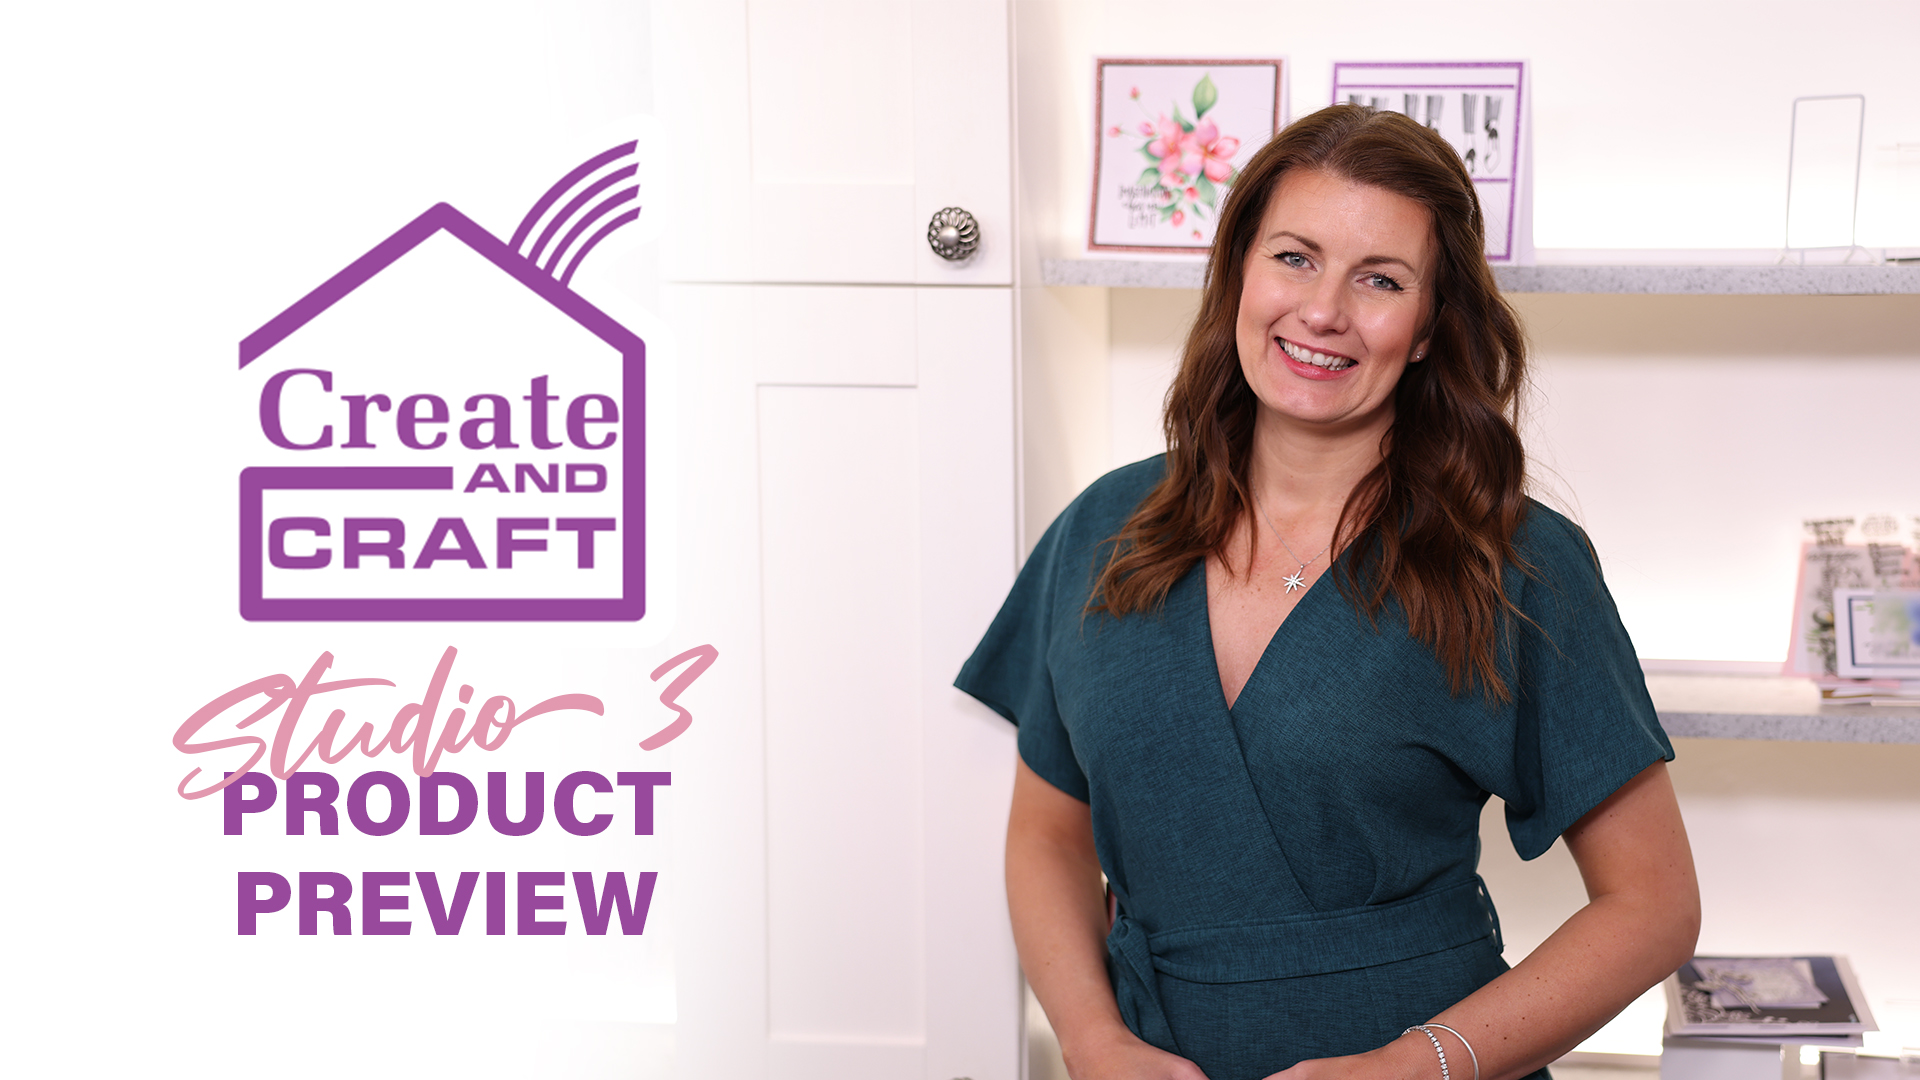 create-and-craft---product-preview---toni-explains-all-about-her-latest-release---broadcast-24th-sept-22